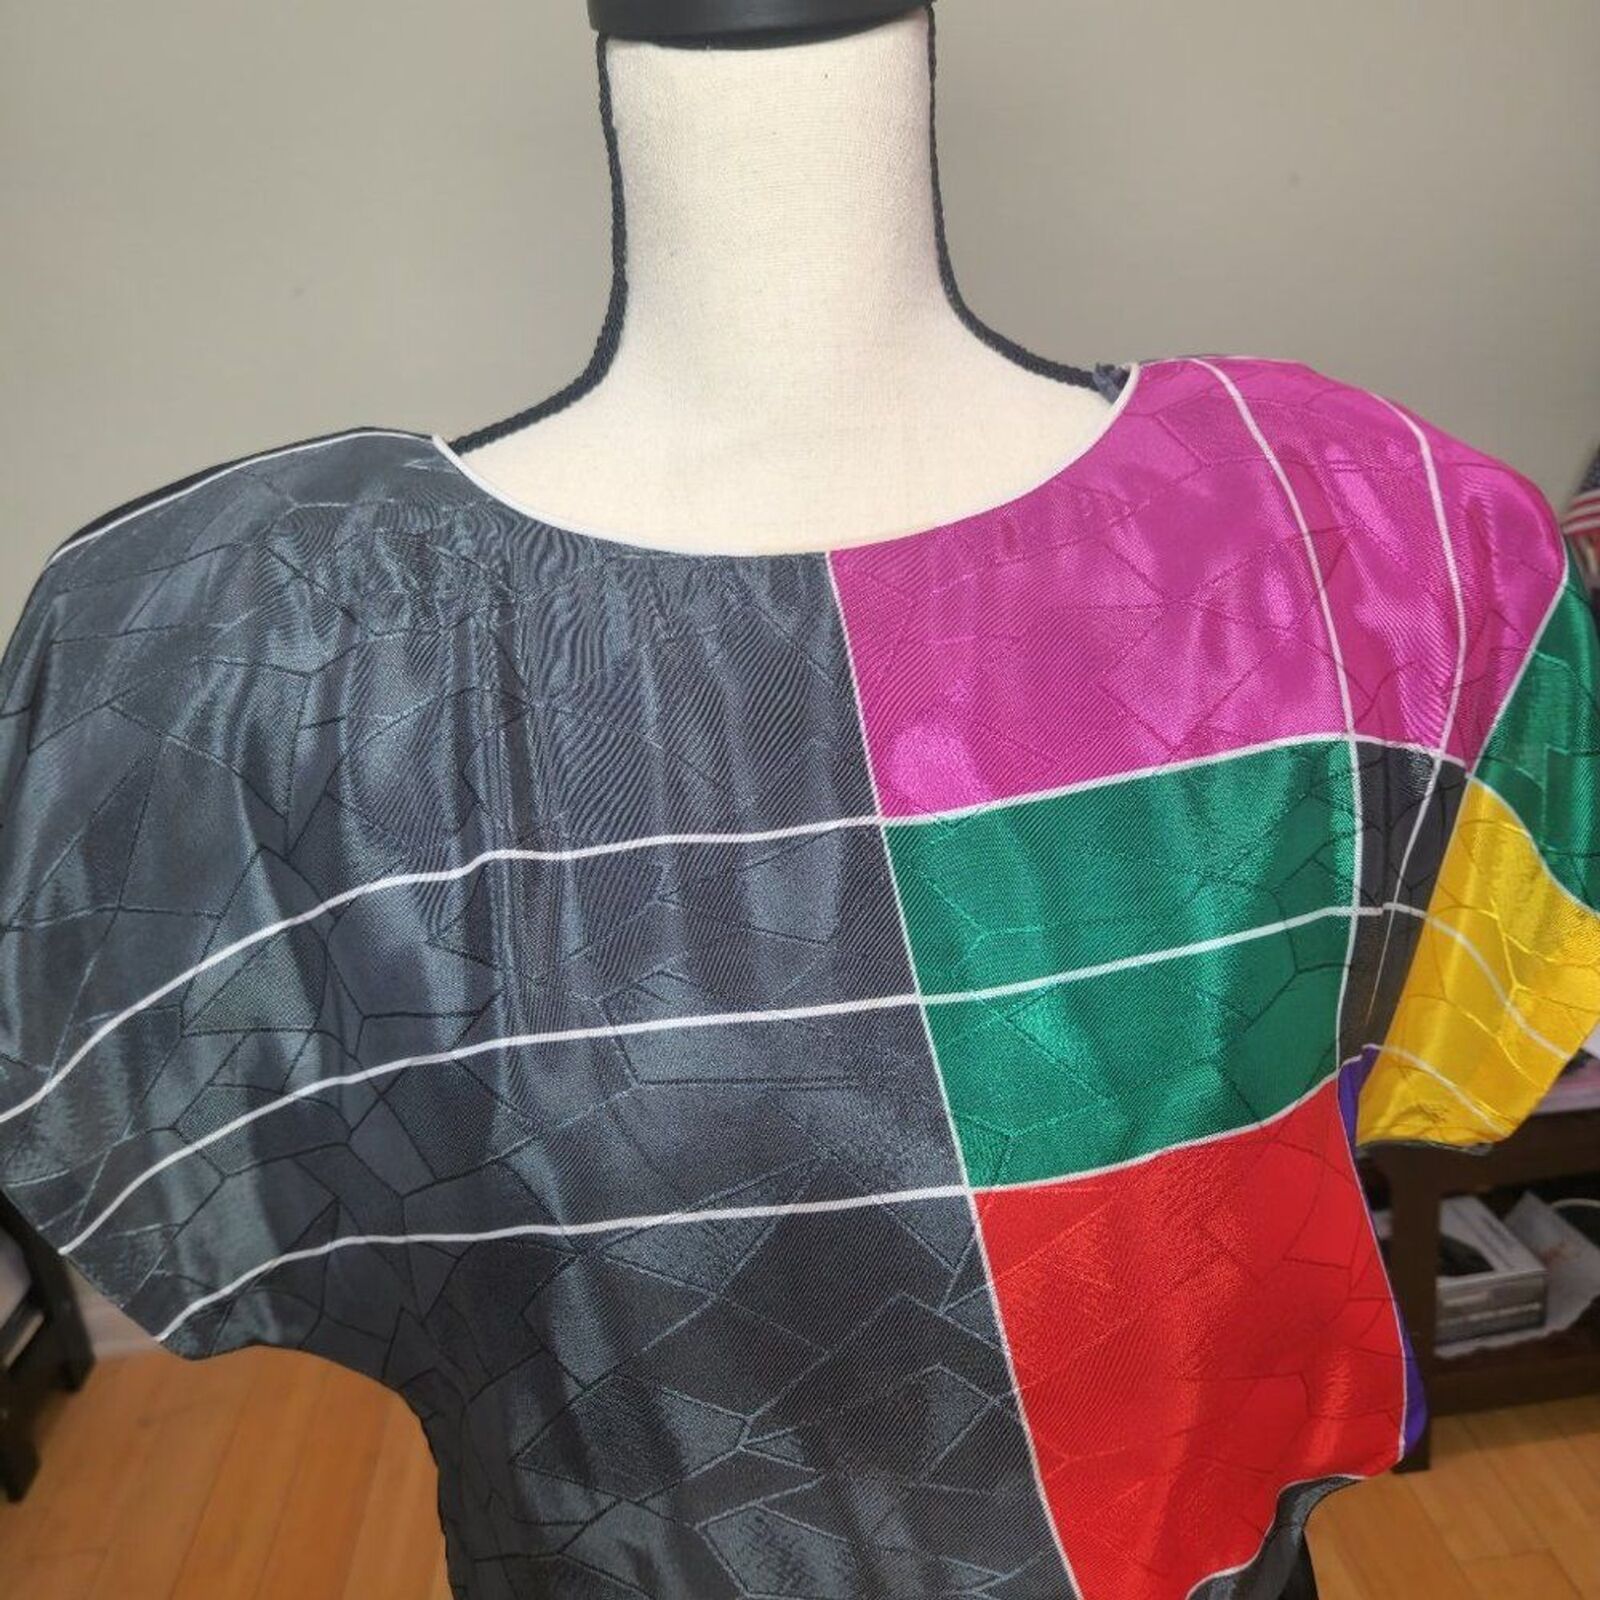 Vintage Colorblock Dress by Act I New York - image 4